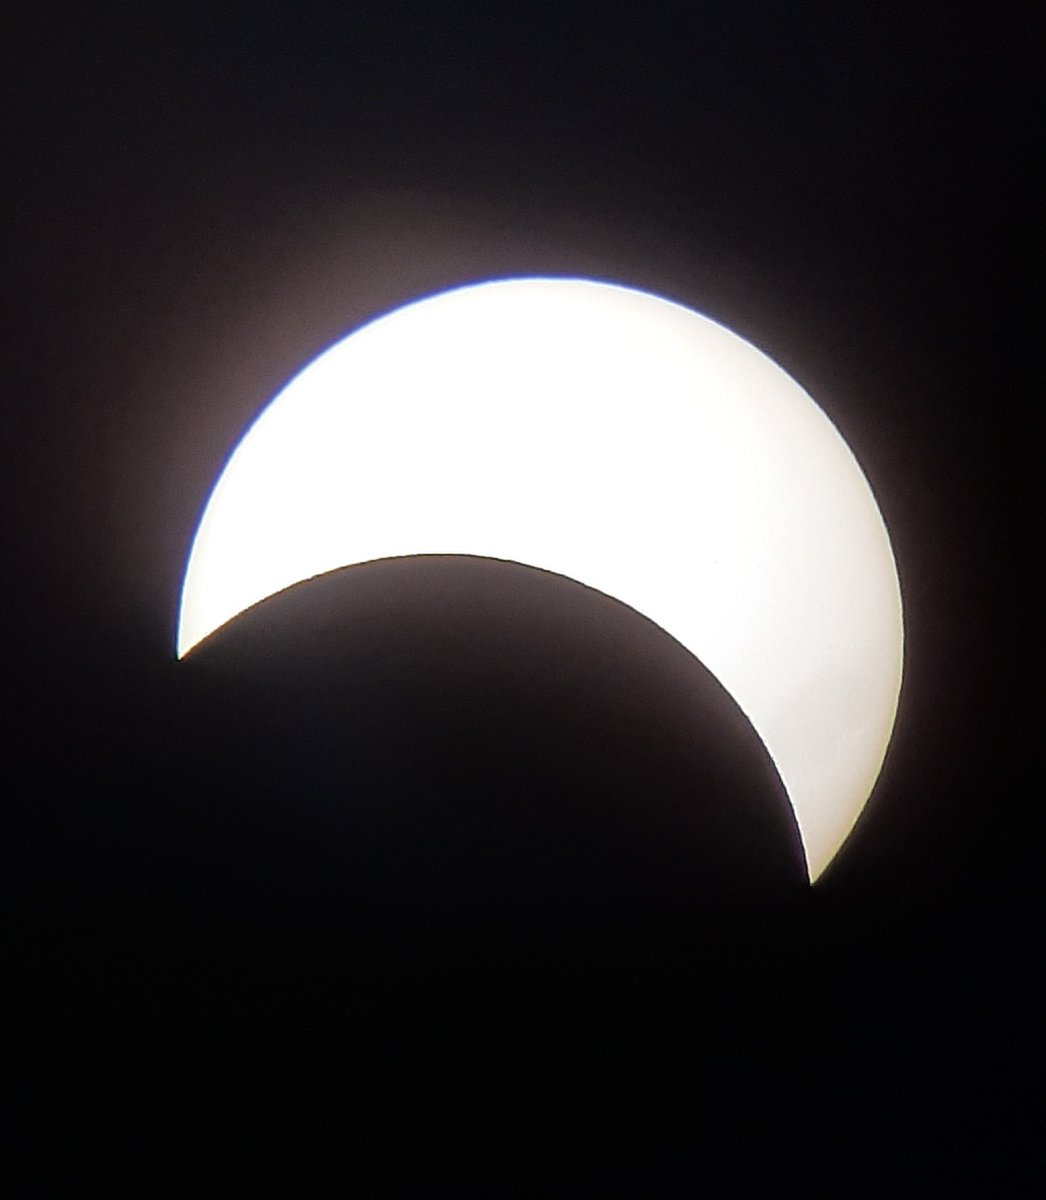 Diana Hews, Prof. Emerita @ Indiana State (staying at the Reserve) took several photos of the partial solar eclipse w. her cell phone through two telescopes set up at the Park Visitor Center. The red photo was taken w. a filter allowing only hydrogen alpha through.